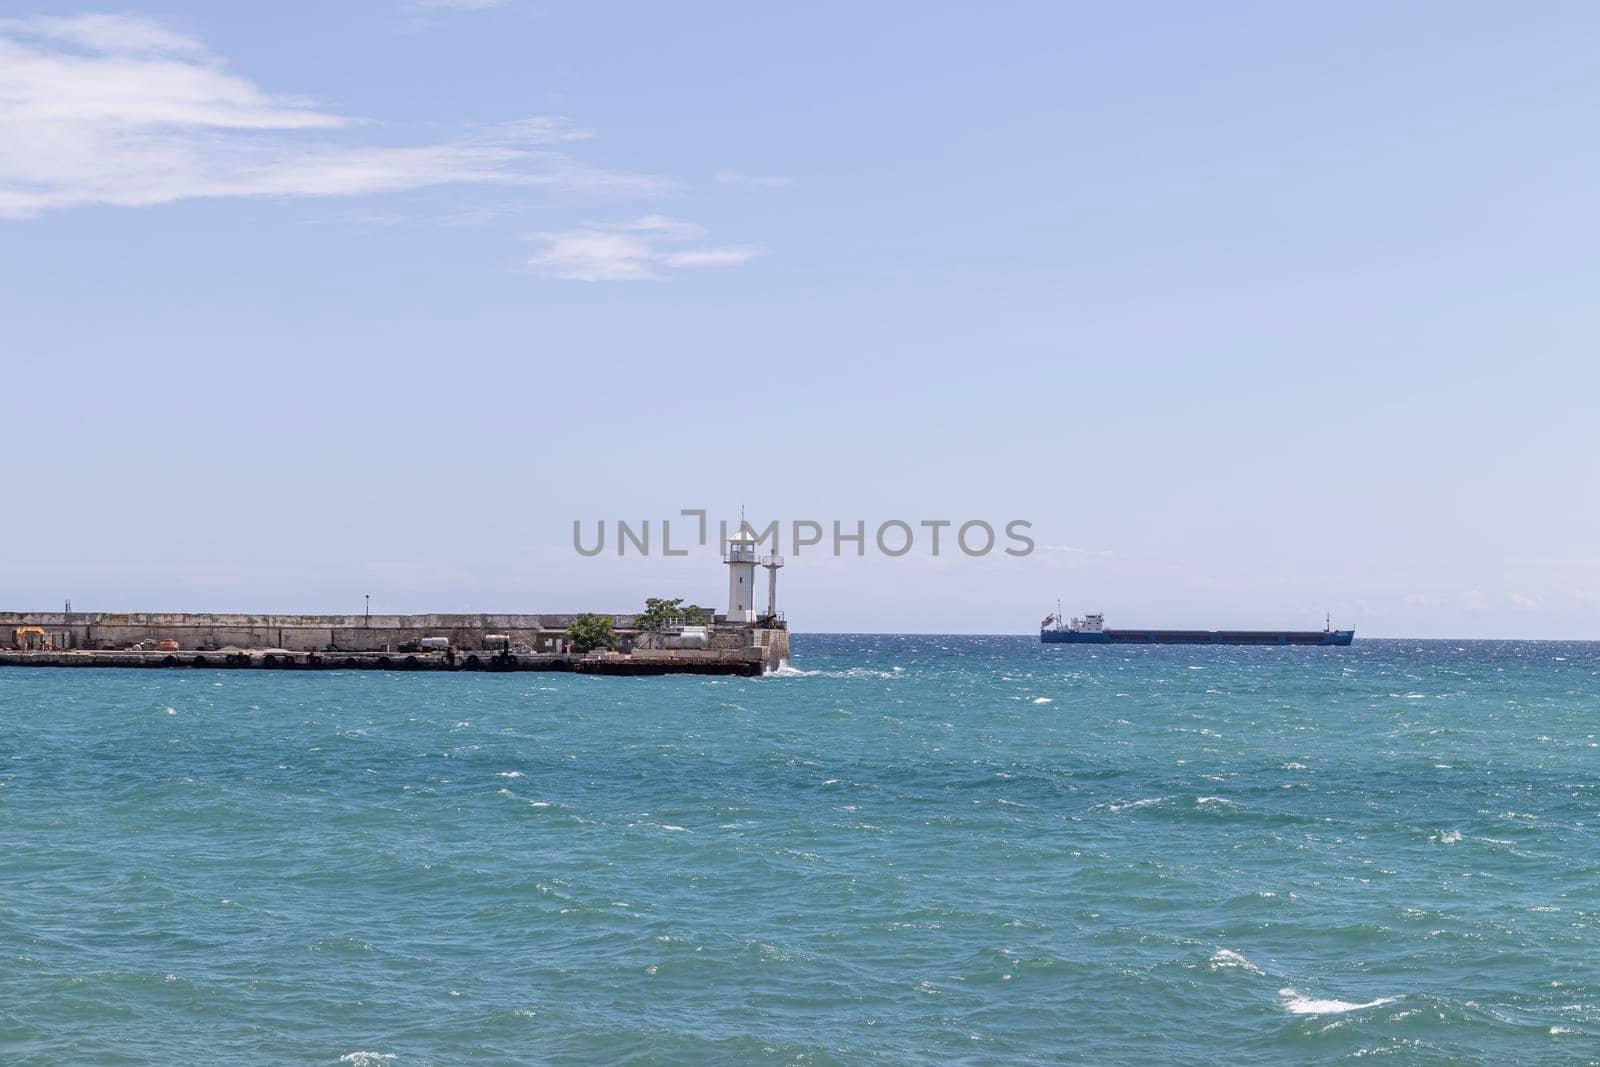 lighthouse on the pier and cargo ship. photo